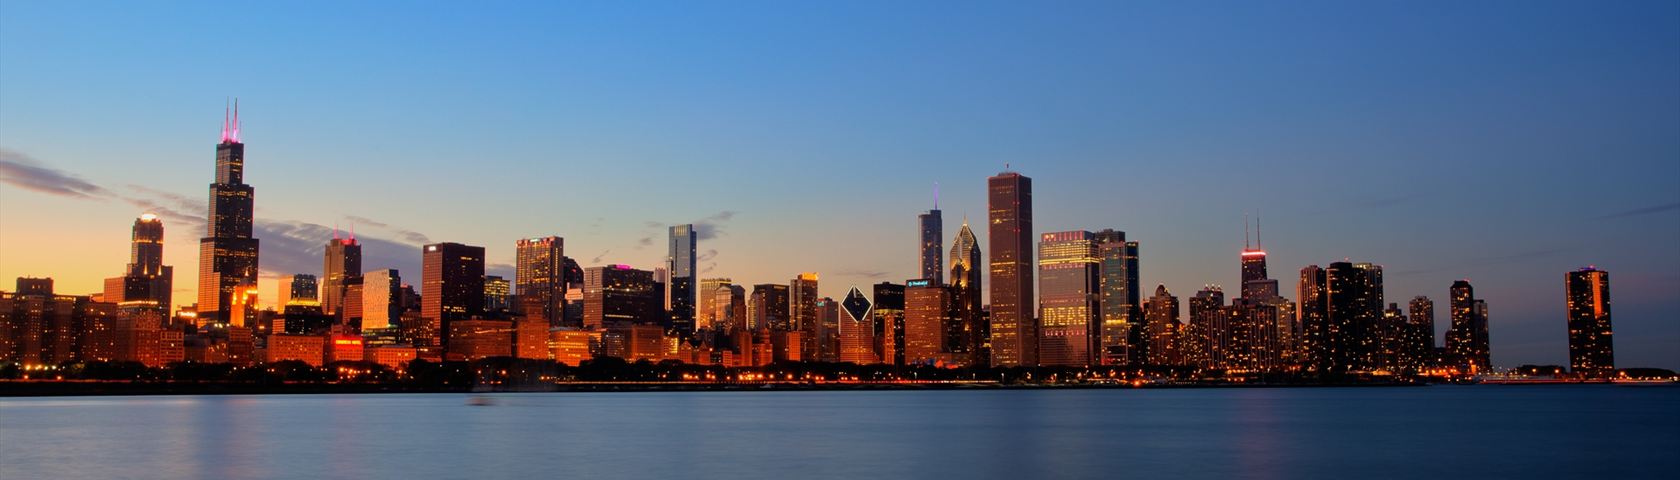 Chicago Skyline • Images • WallpaperFusion by Binary Fortress Software